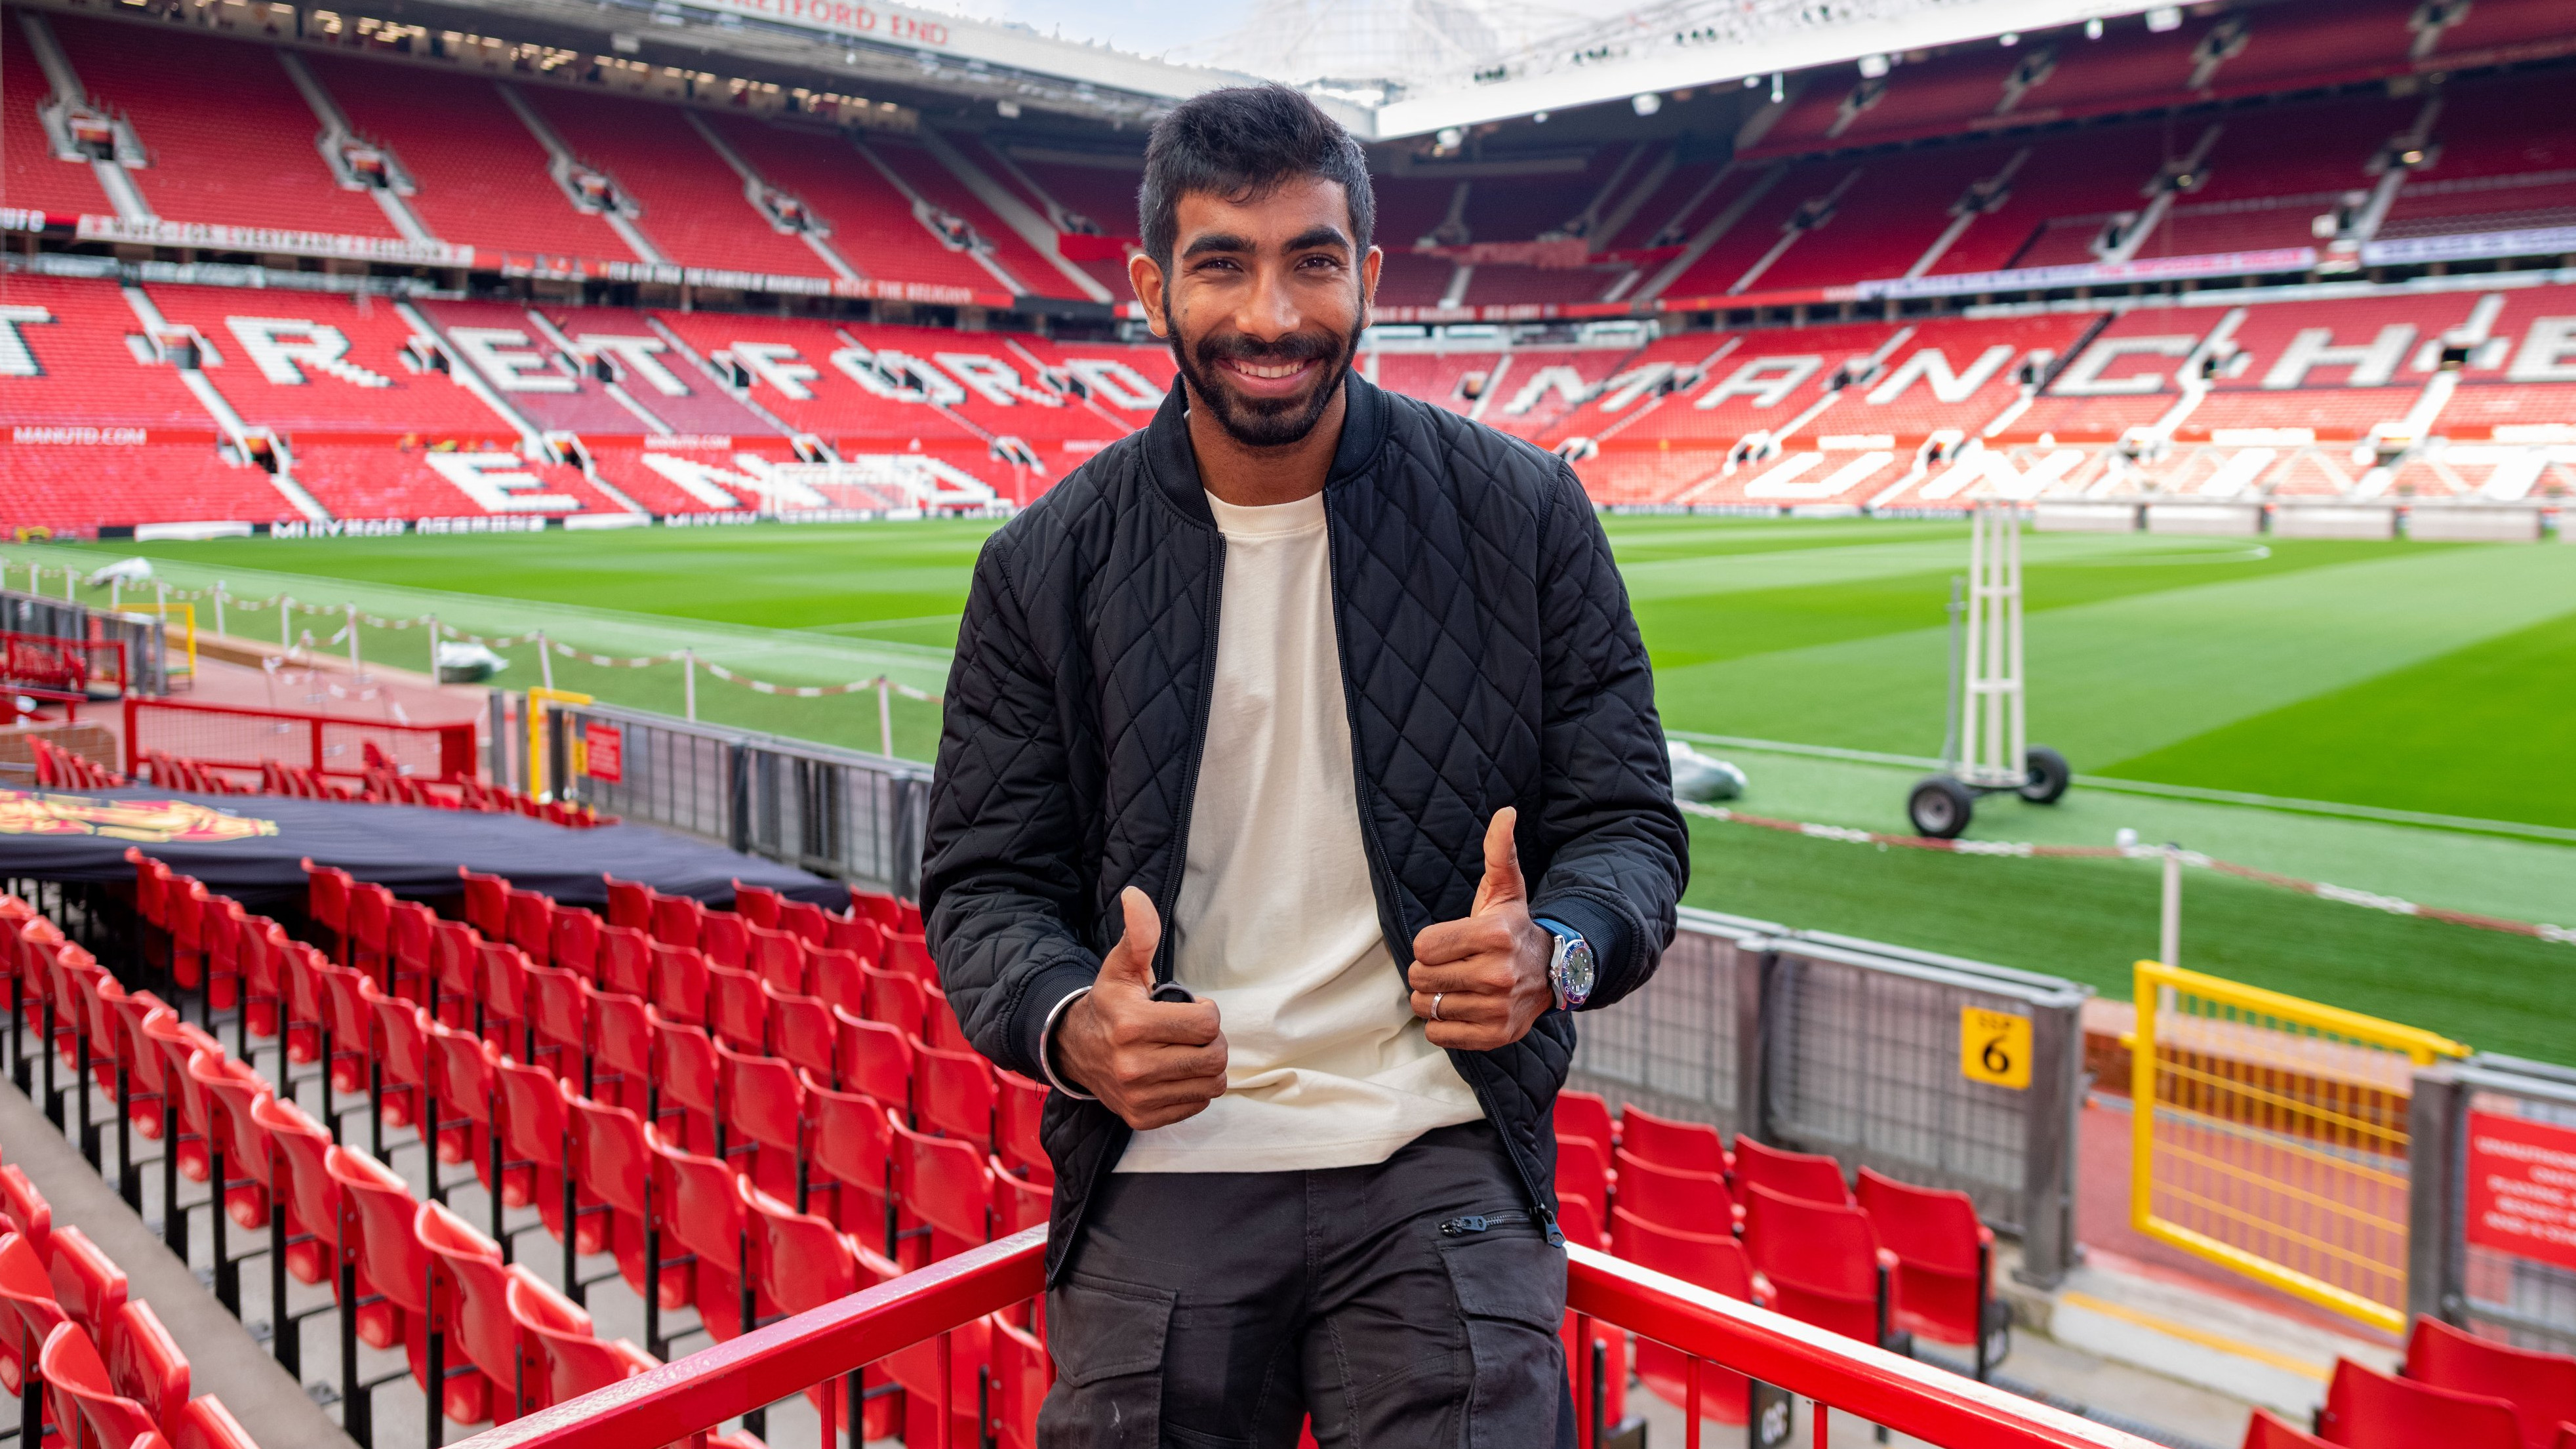 Manchester United shares pictures from Jasprit Bumrah's visit to Old Trafford